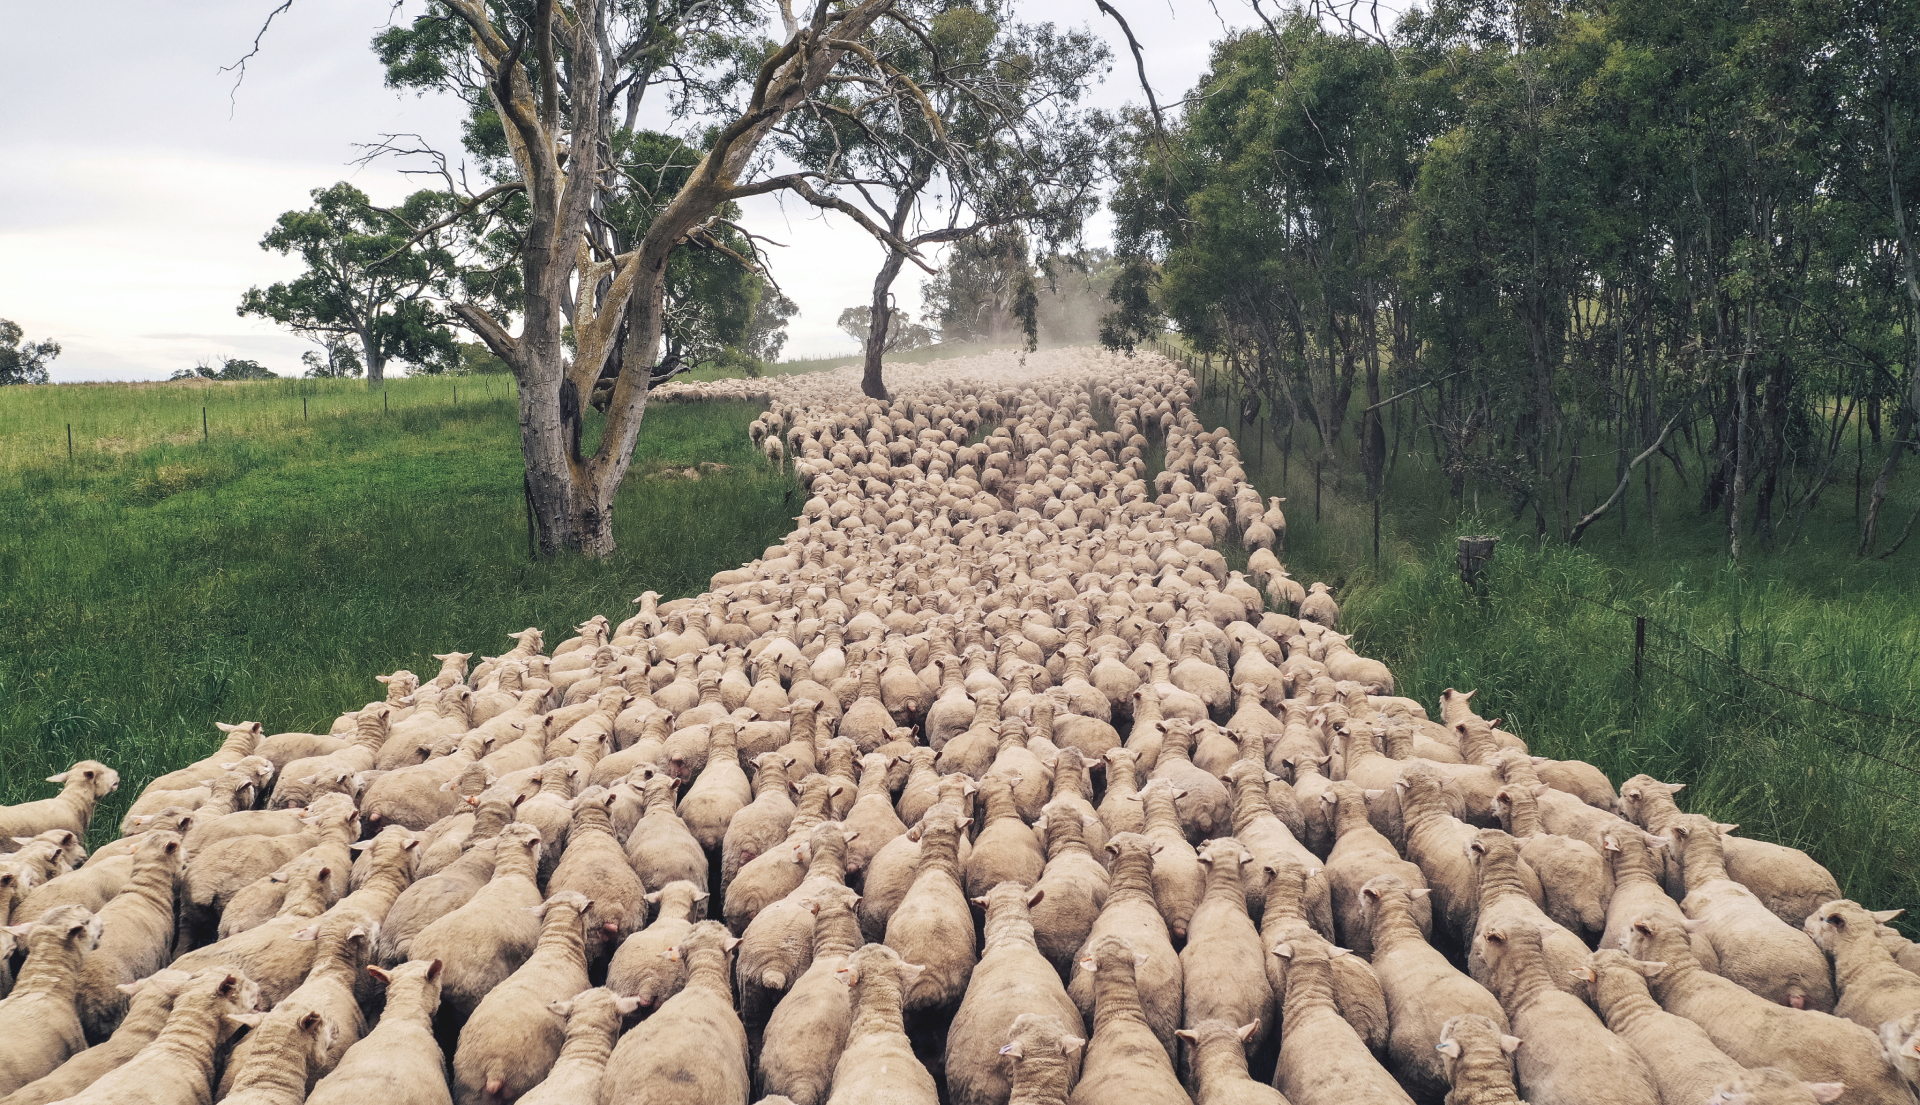 sheep being herded into a field